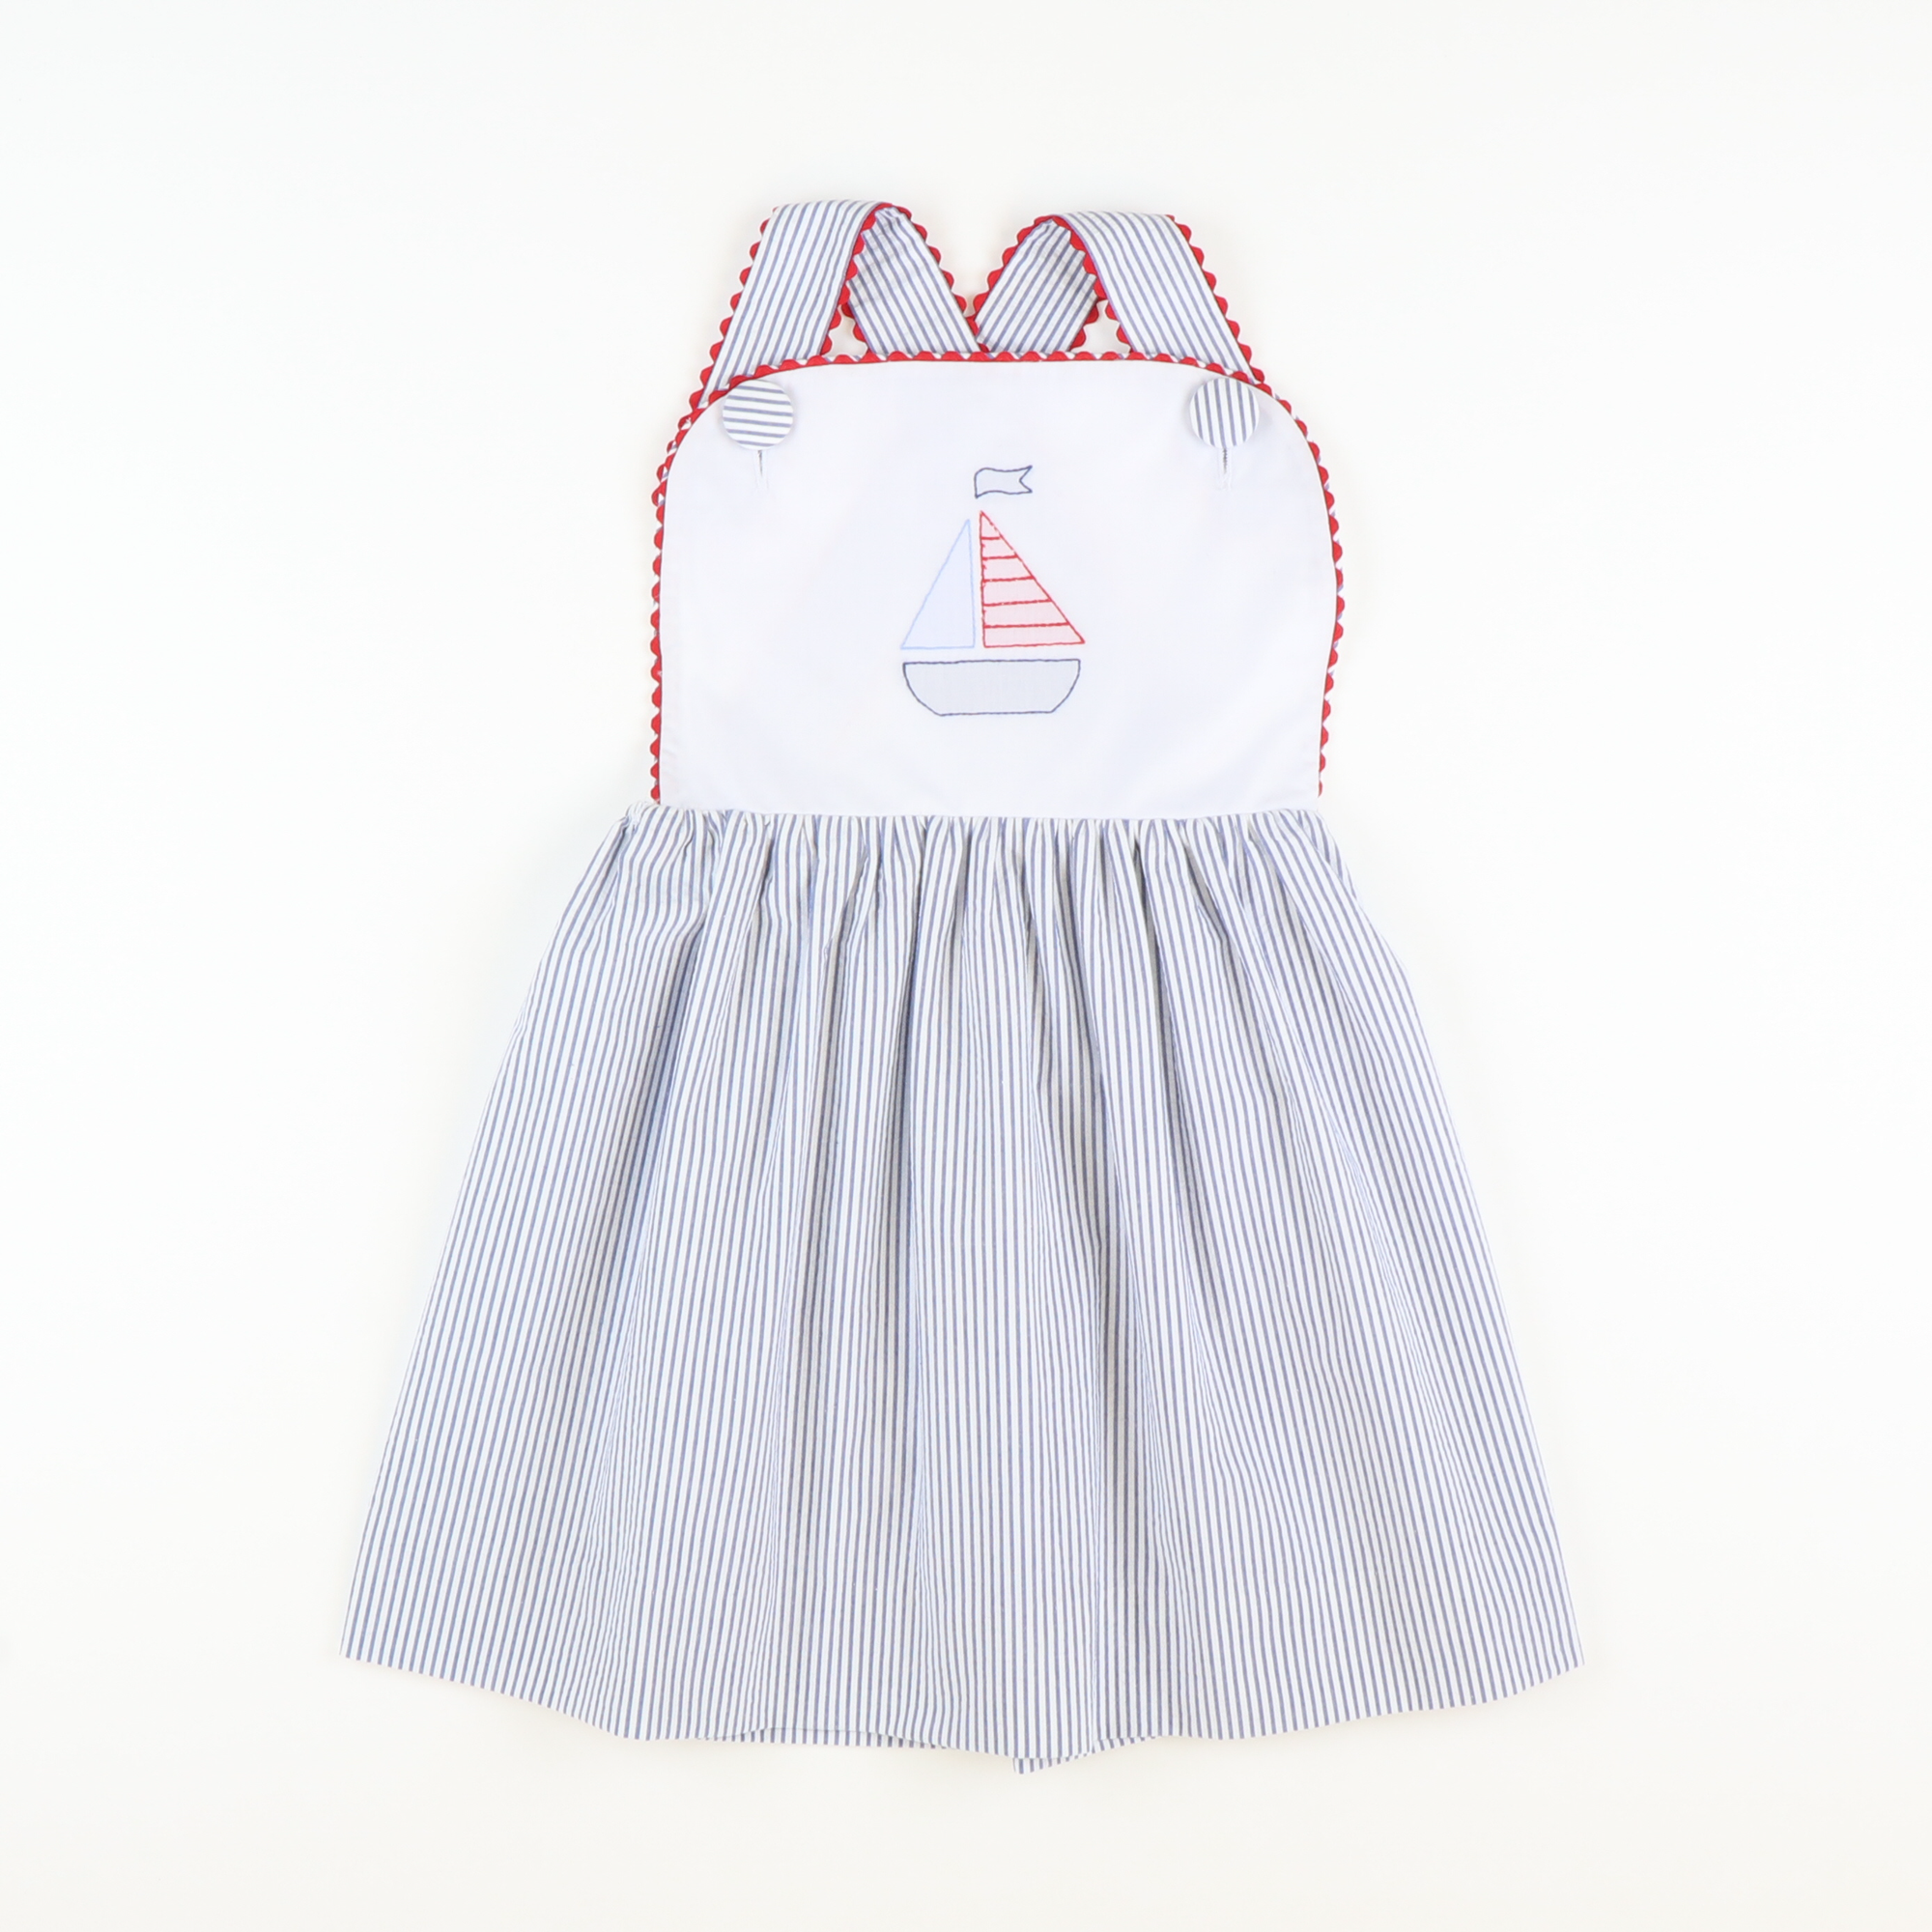 Embroidered Sailboat Dress